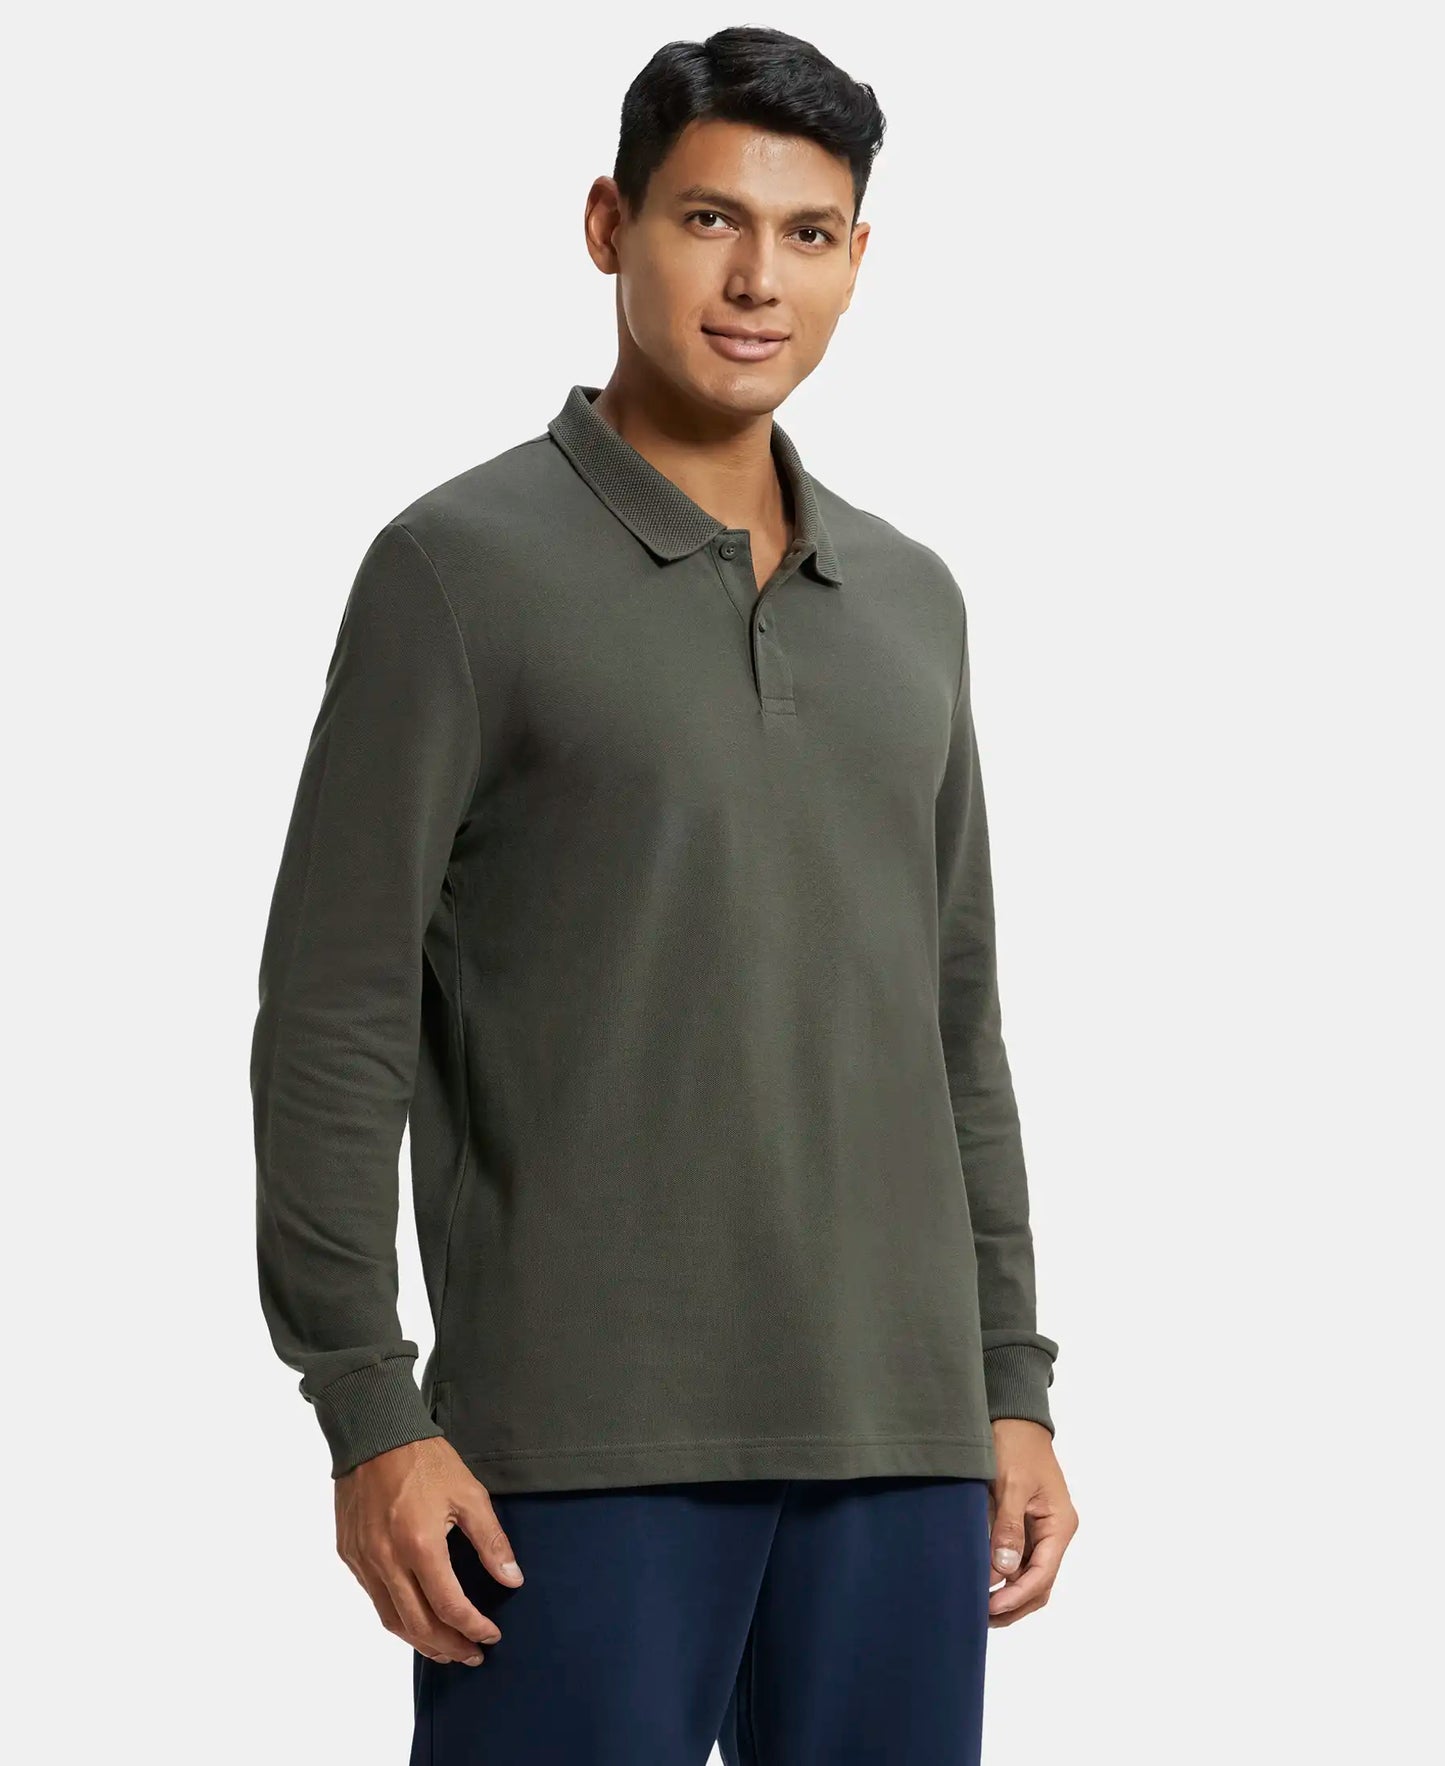 Super Combed Cotton Rich Pique Fabric Solid Full Sleeve Polo T-Shirt with Ribbed Cuffs - Deep Olive-2